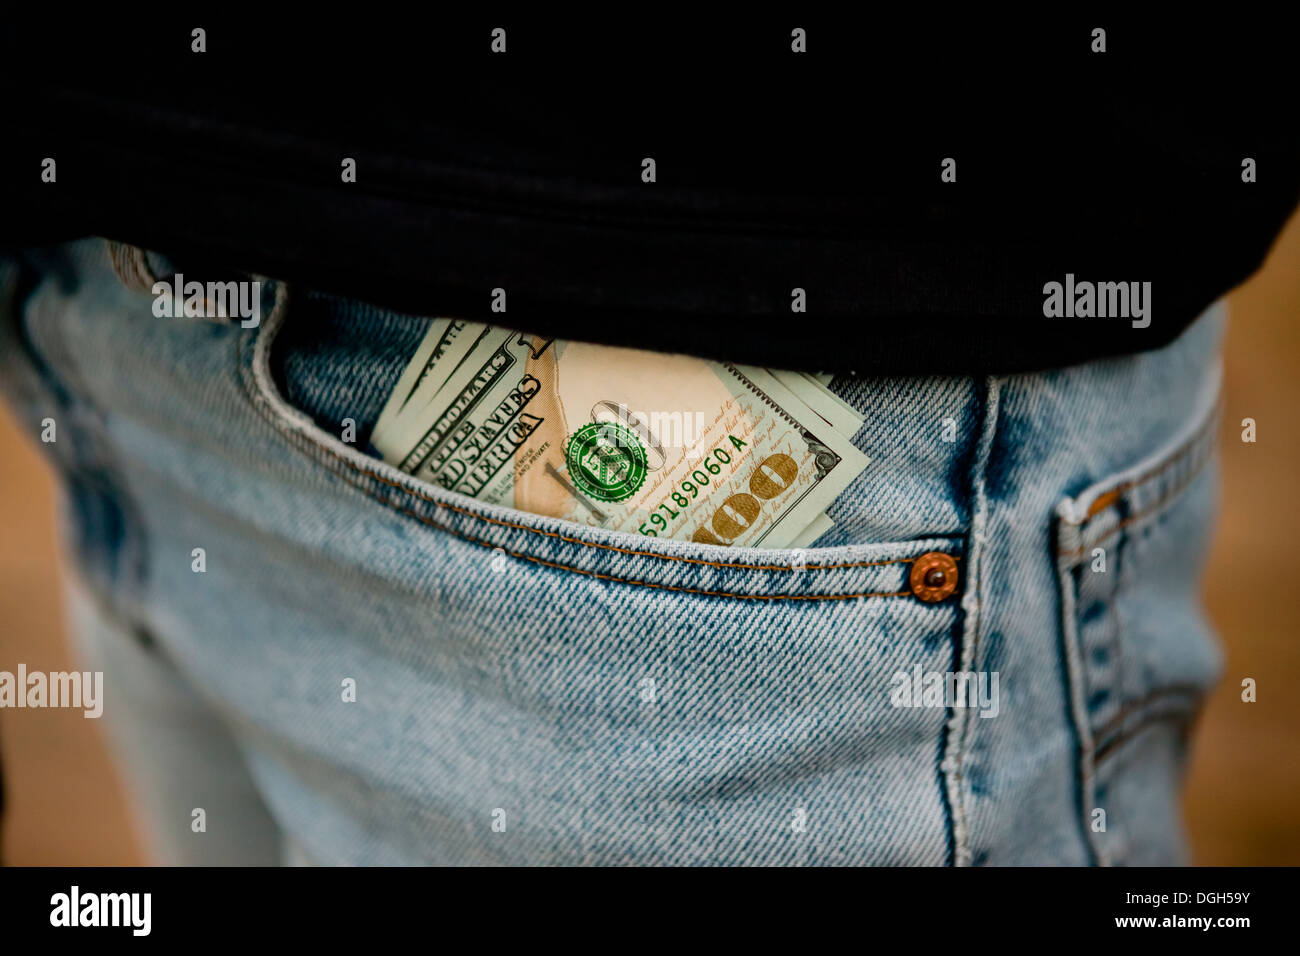 Money sticking out of pants front pocket Stock Photo